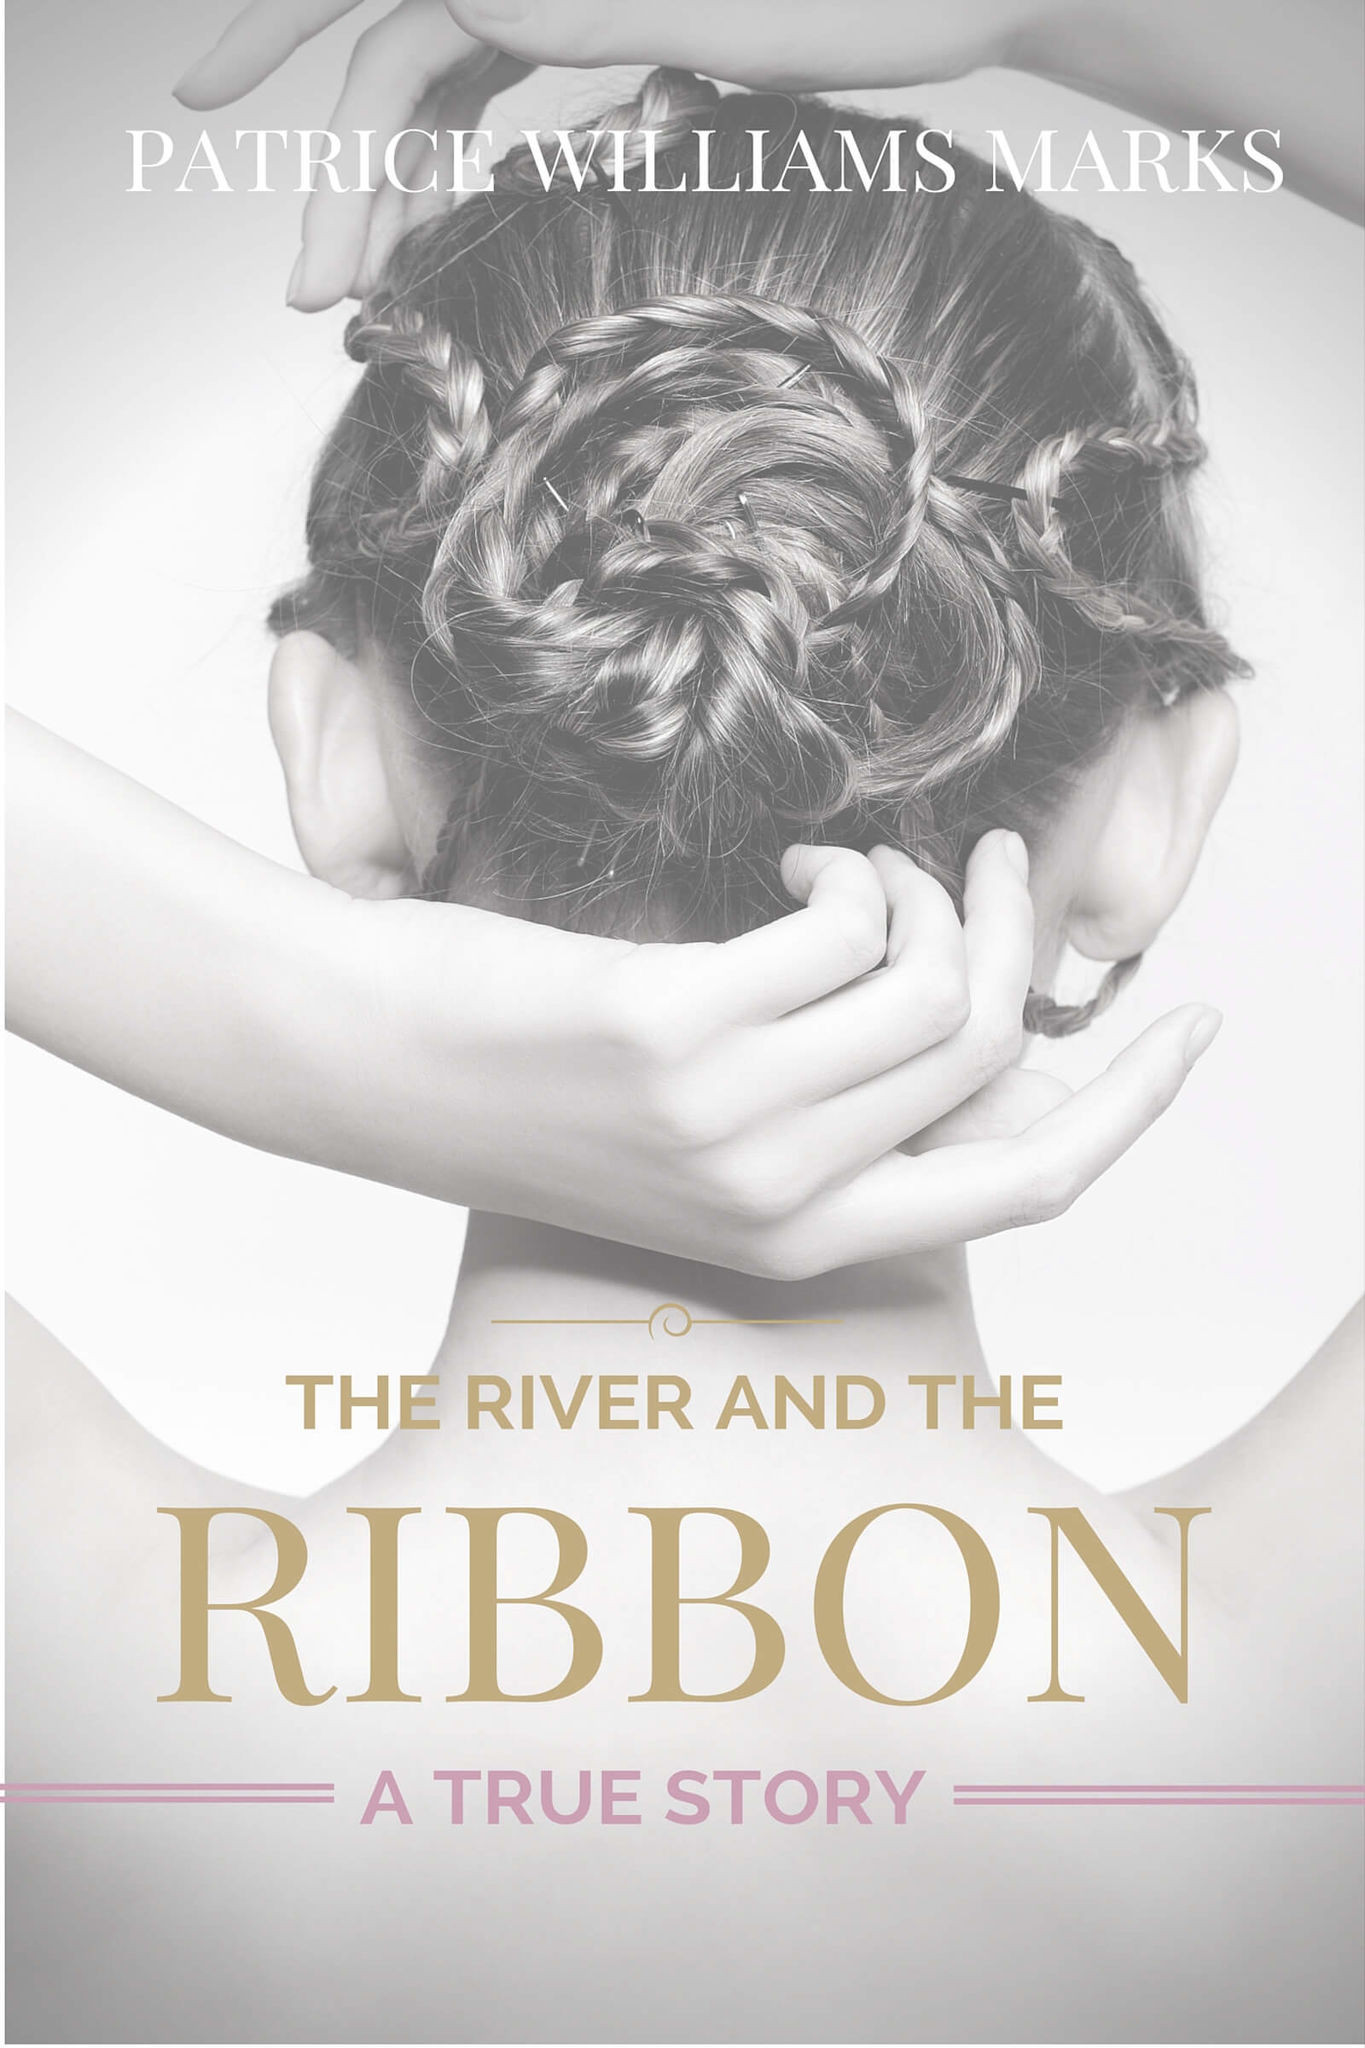 THE RIVER AND THE RIBBON